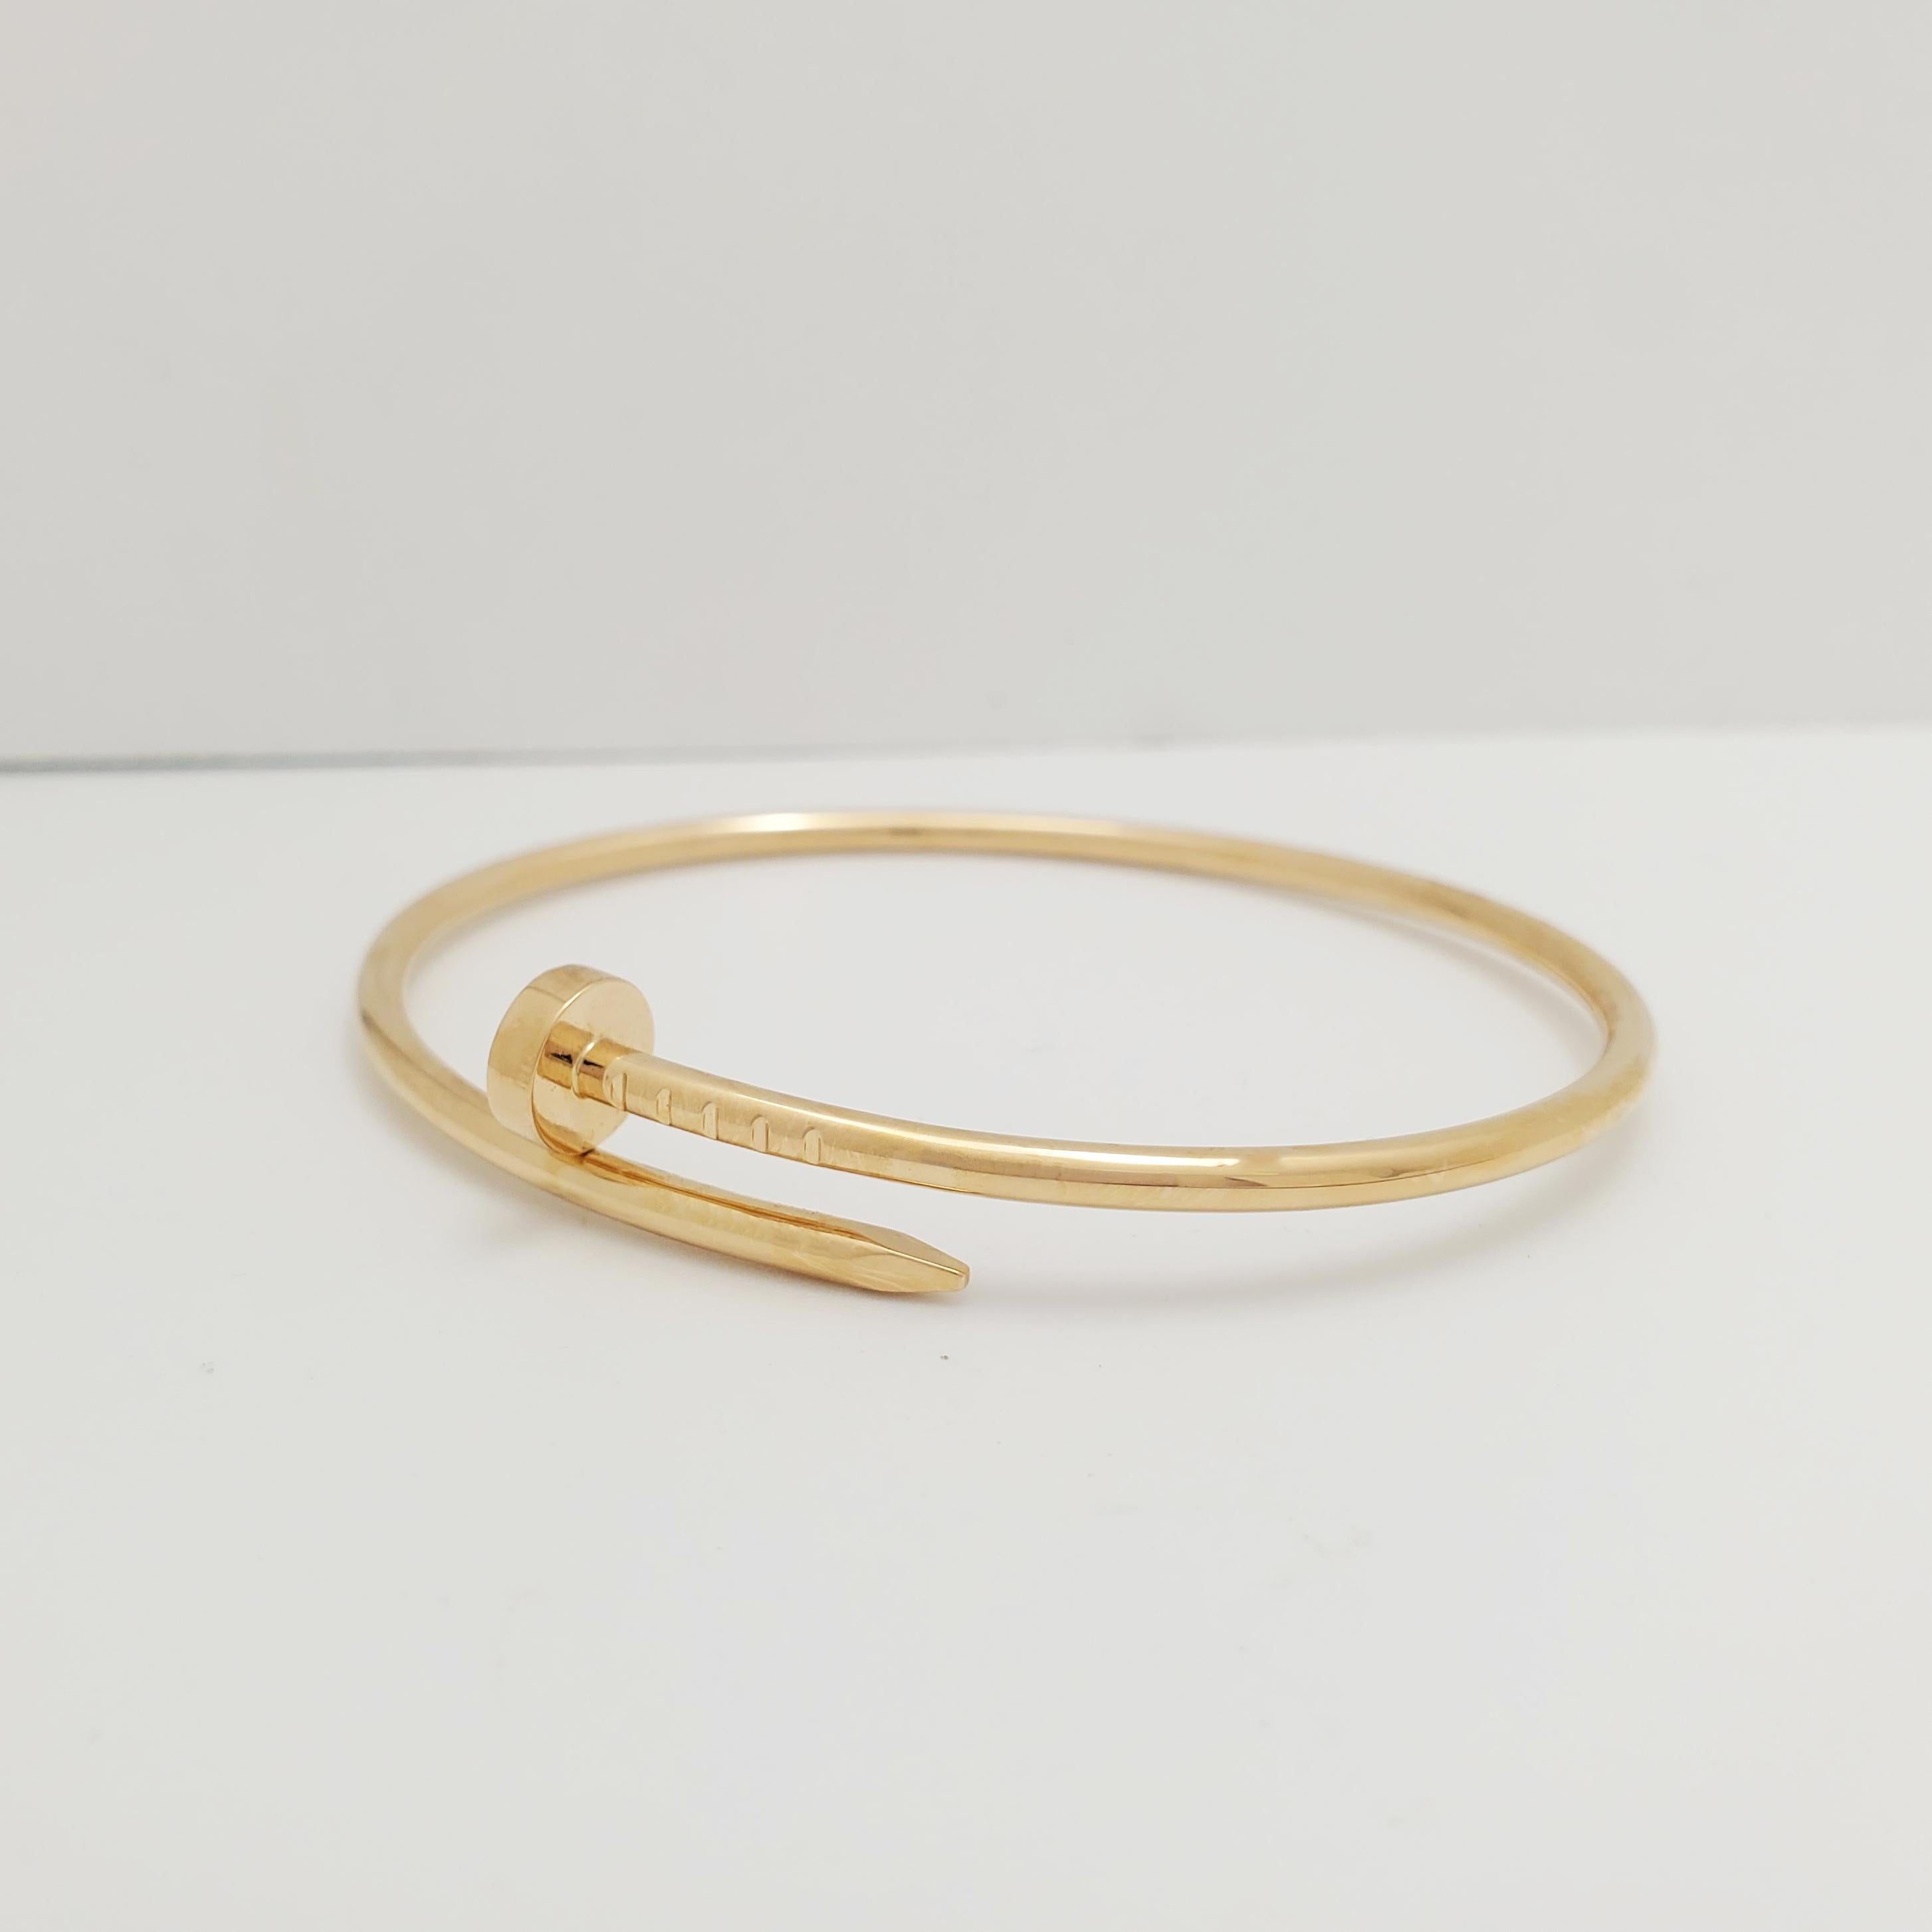 Designed as a 'just a nail', this authentic Cartier 'Juste un Clou' bracelet is an innovative twist on a familiar and ordinary object. Signed Cartier, 17, Au750, with serial number. Presented with the original Cartier box and papers. CIRCA